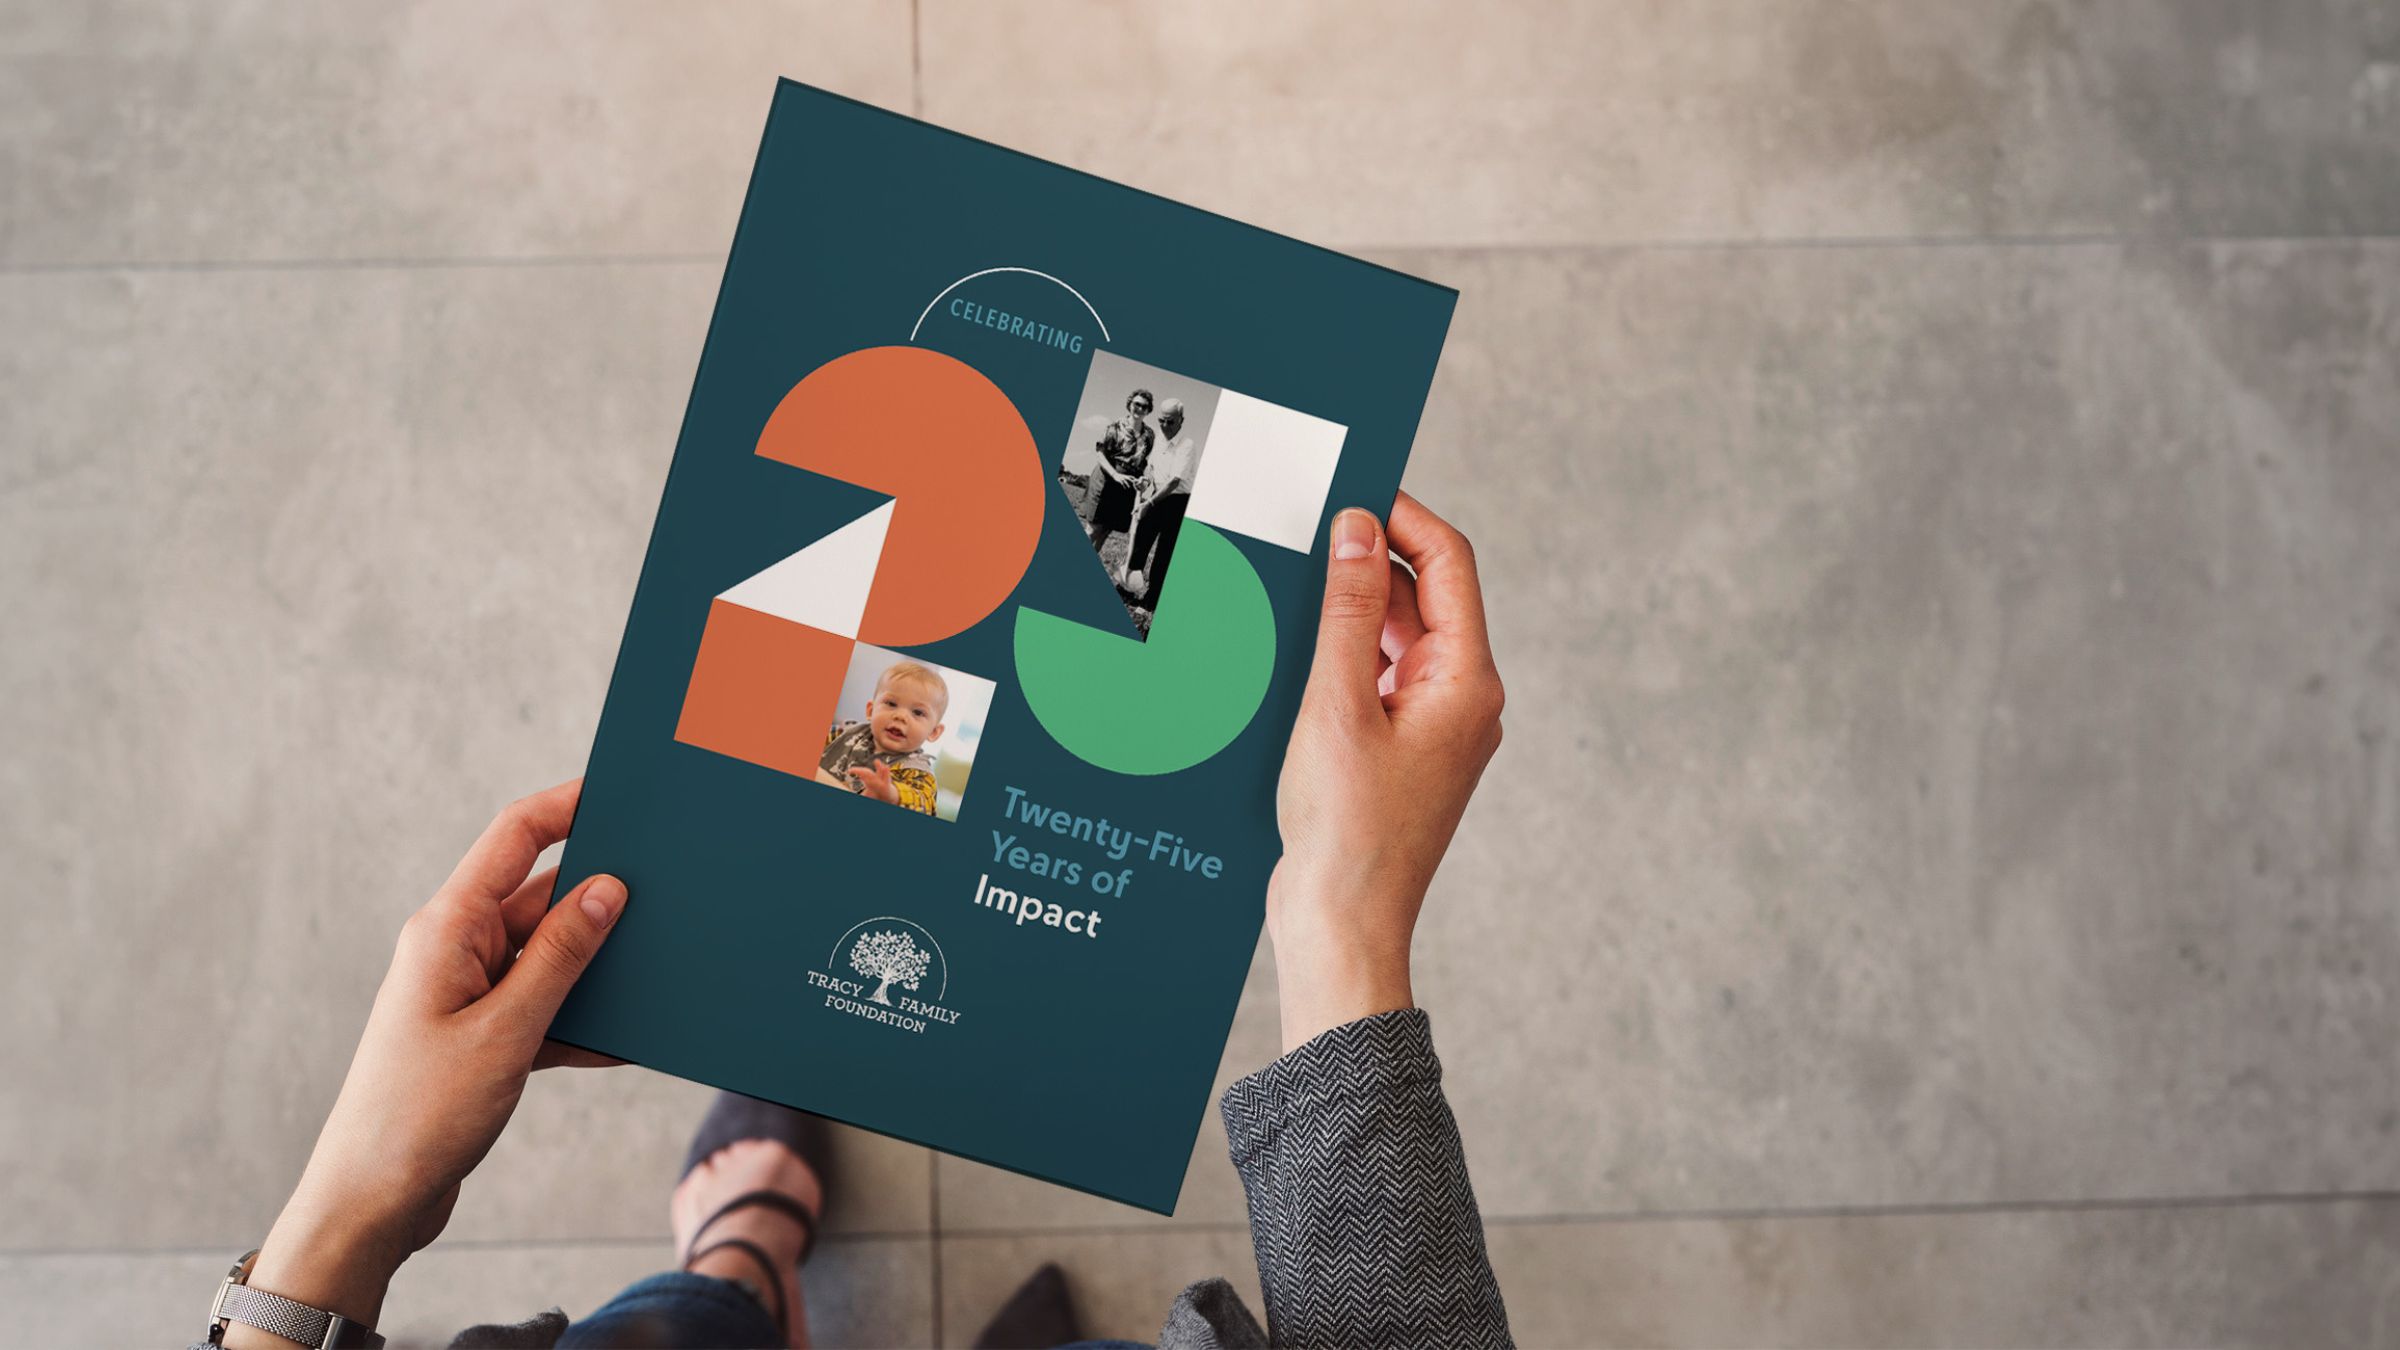 Image of Tracy Family Foundation's 25th anniversary report cover